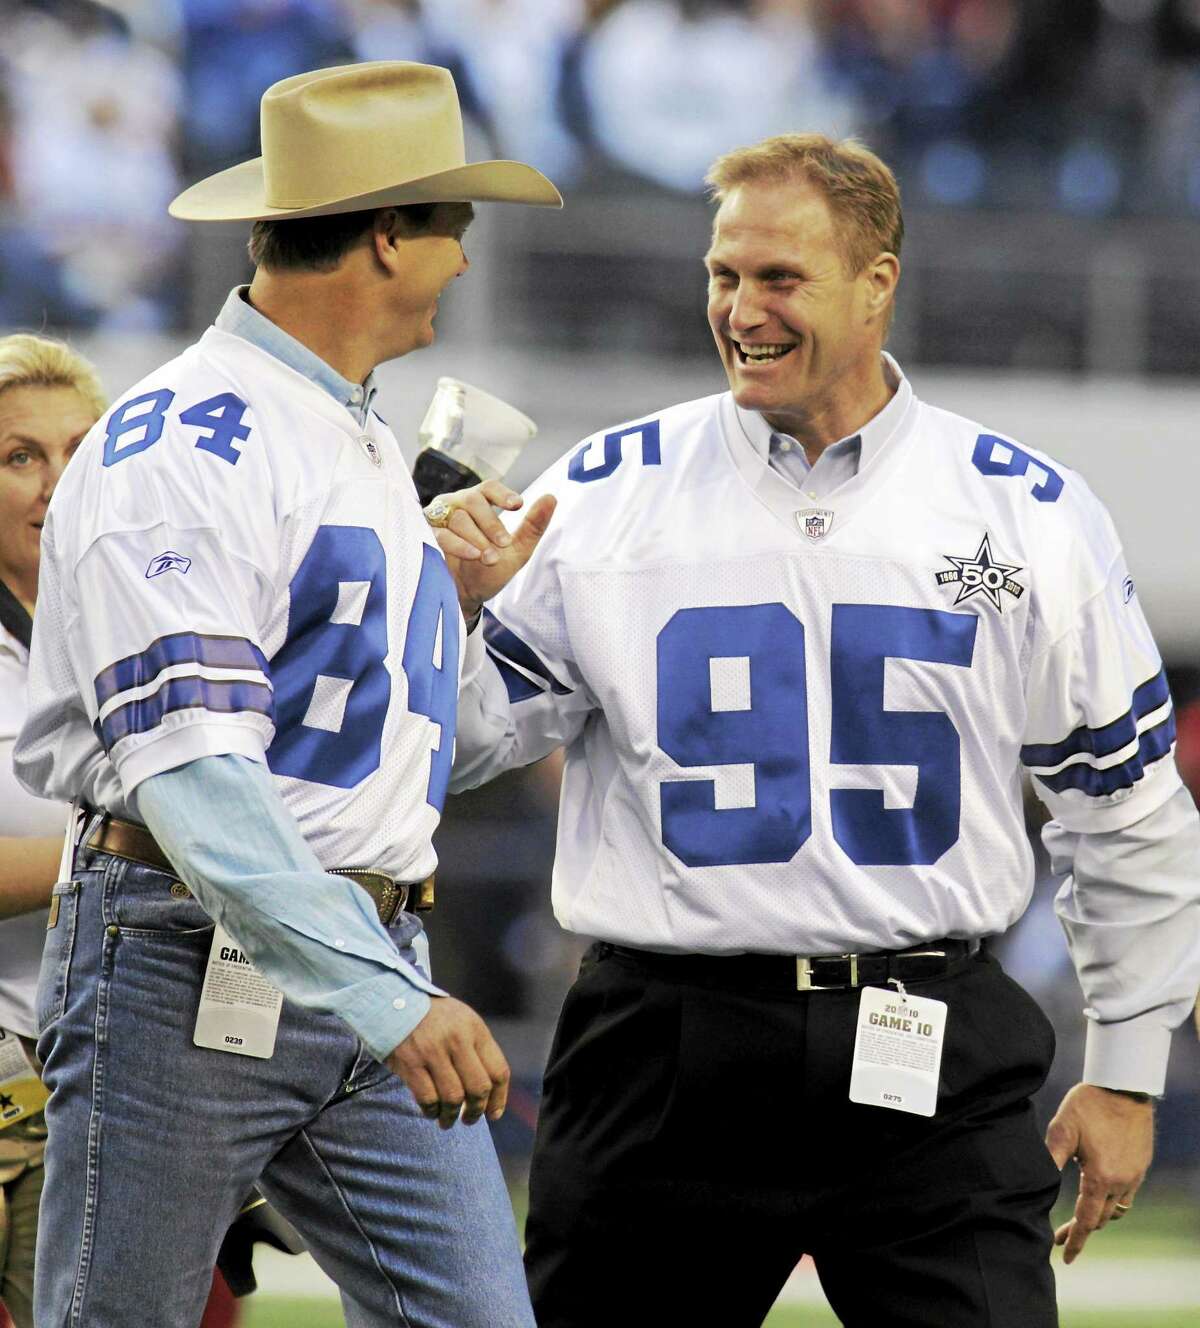 Former Dallas Cowboys defensive lineman Chad Hennings, right, is the recipient of the 2014 Walter Camp Football Foundation Alumni Award. At left is Jay Novacek.